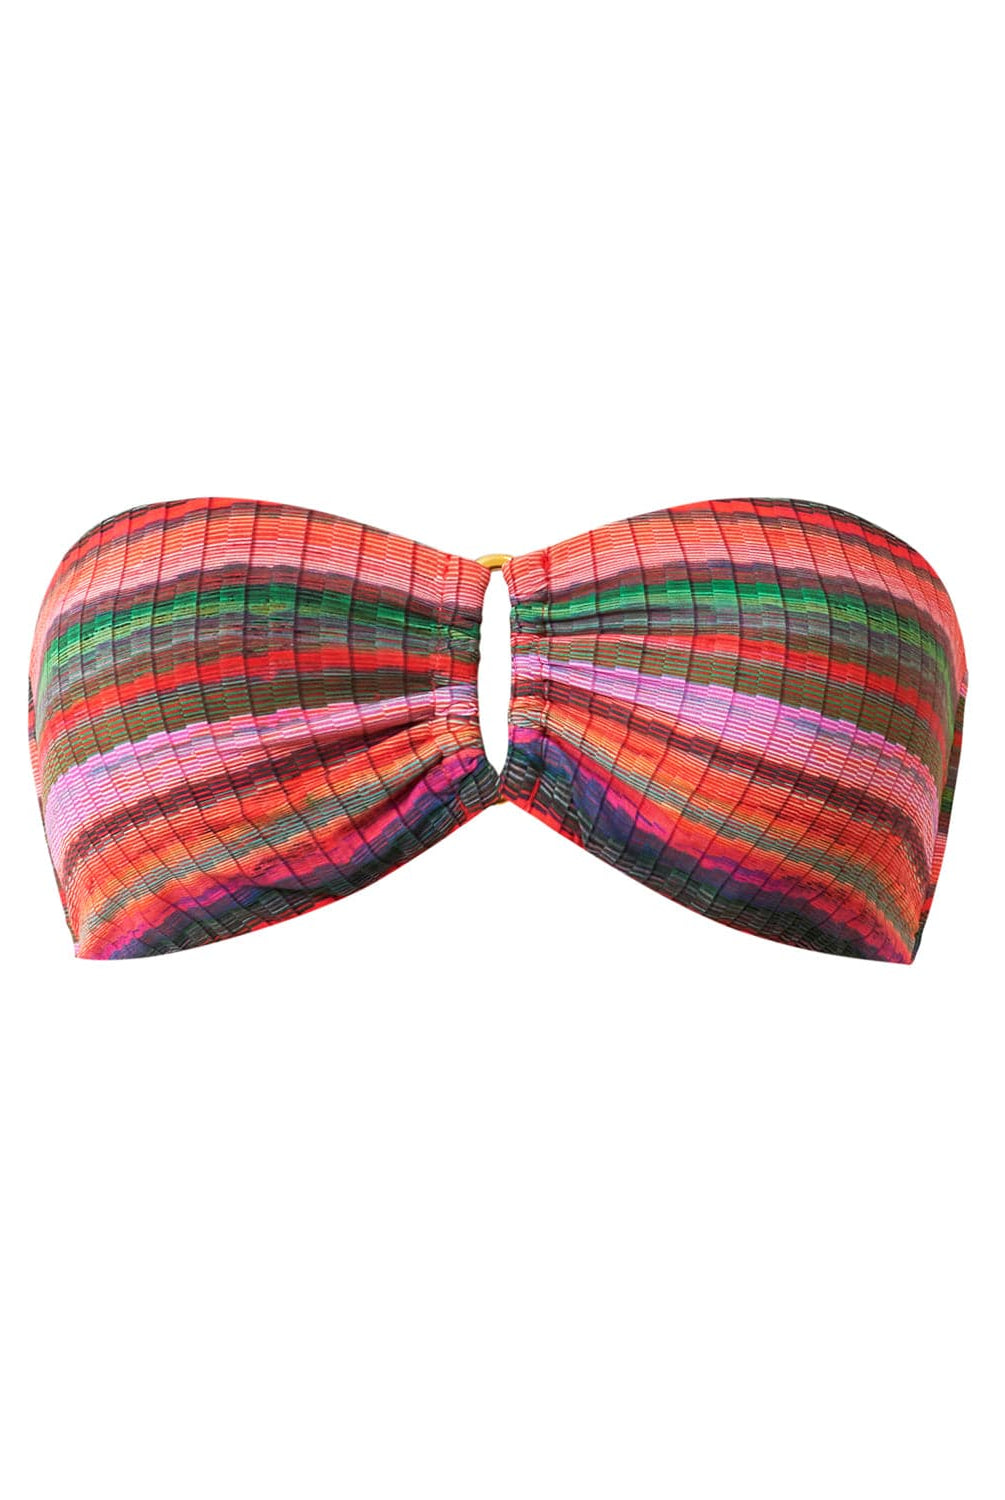 A multi-colored stripe print bandeau bikini top with gold details. Featured against a white wall background.